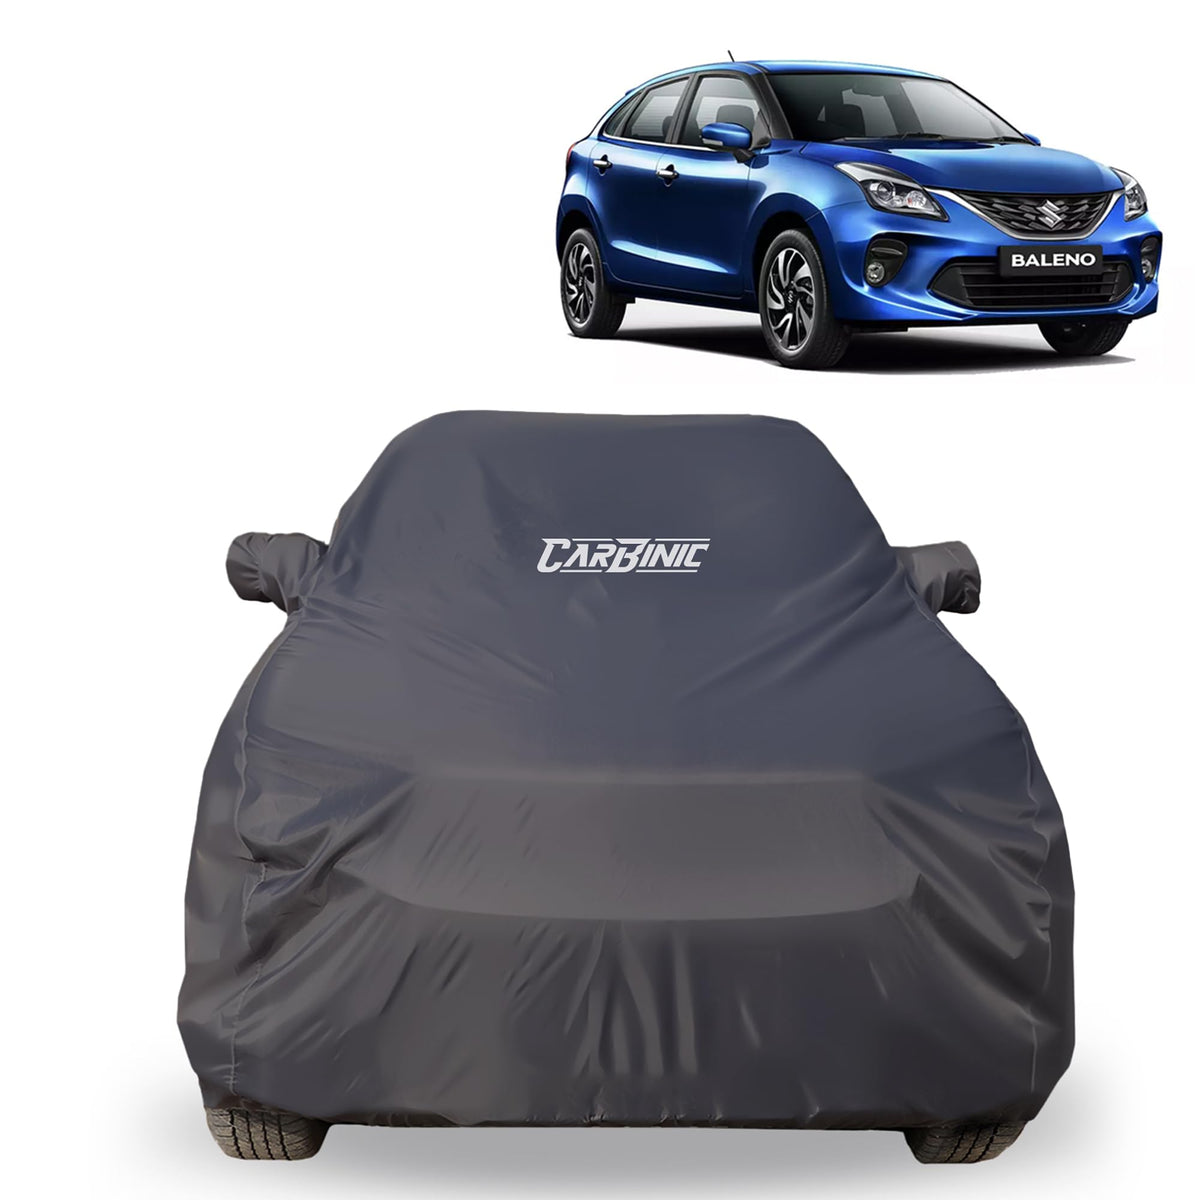 CARBINIC Car Body Cover for Maruti Baleno 2022 | Water Resistant, UV Protection Car Cover | Scratchproof Body Shield | All-Weather Cover | Mirror Pocket & Antenna | Car Accessories Dusk Grey